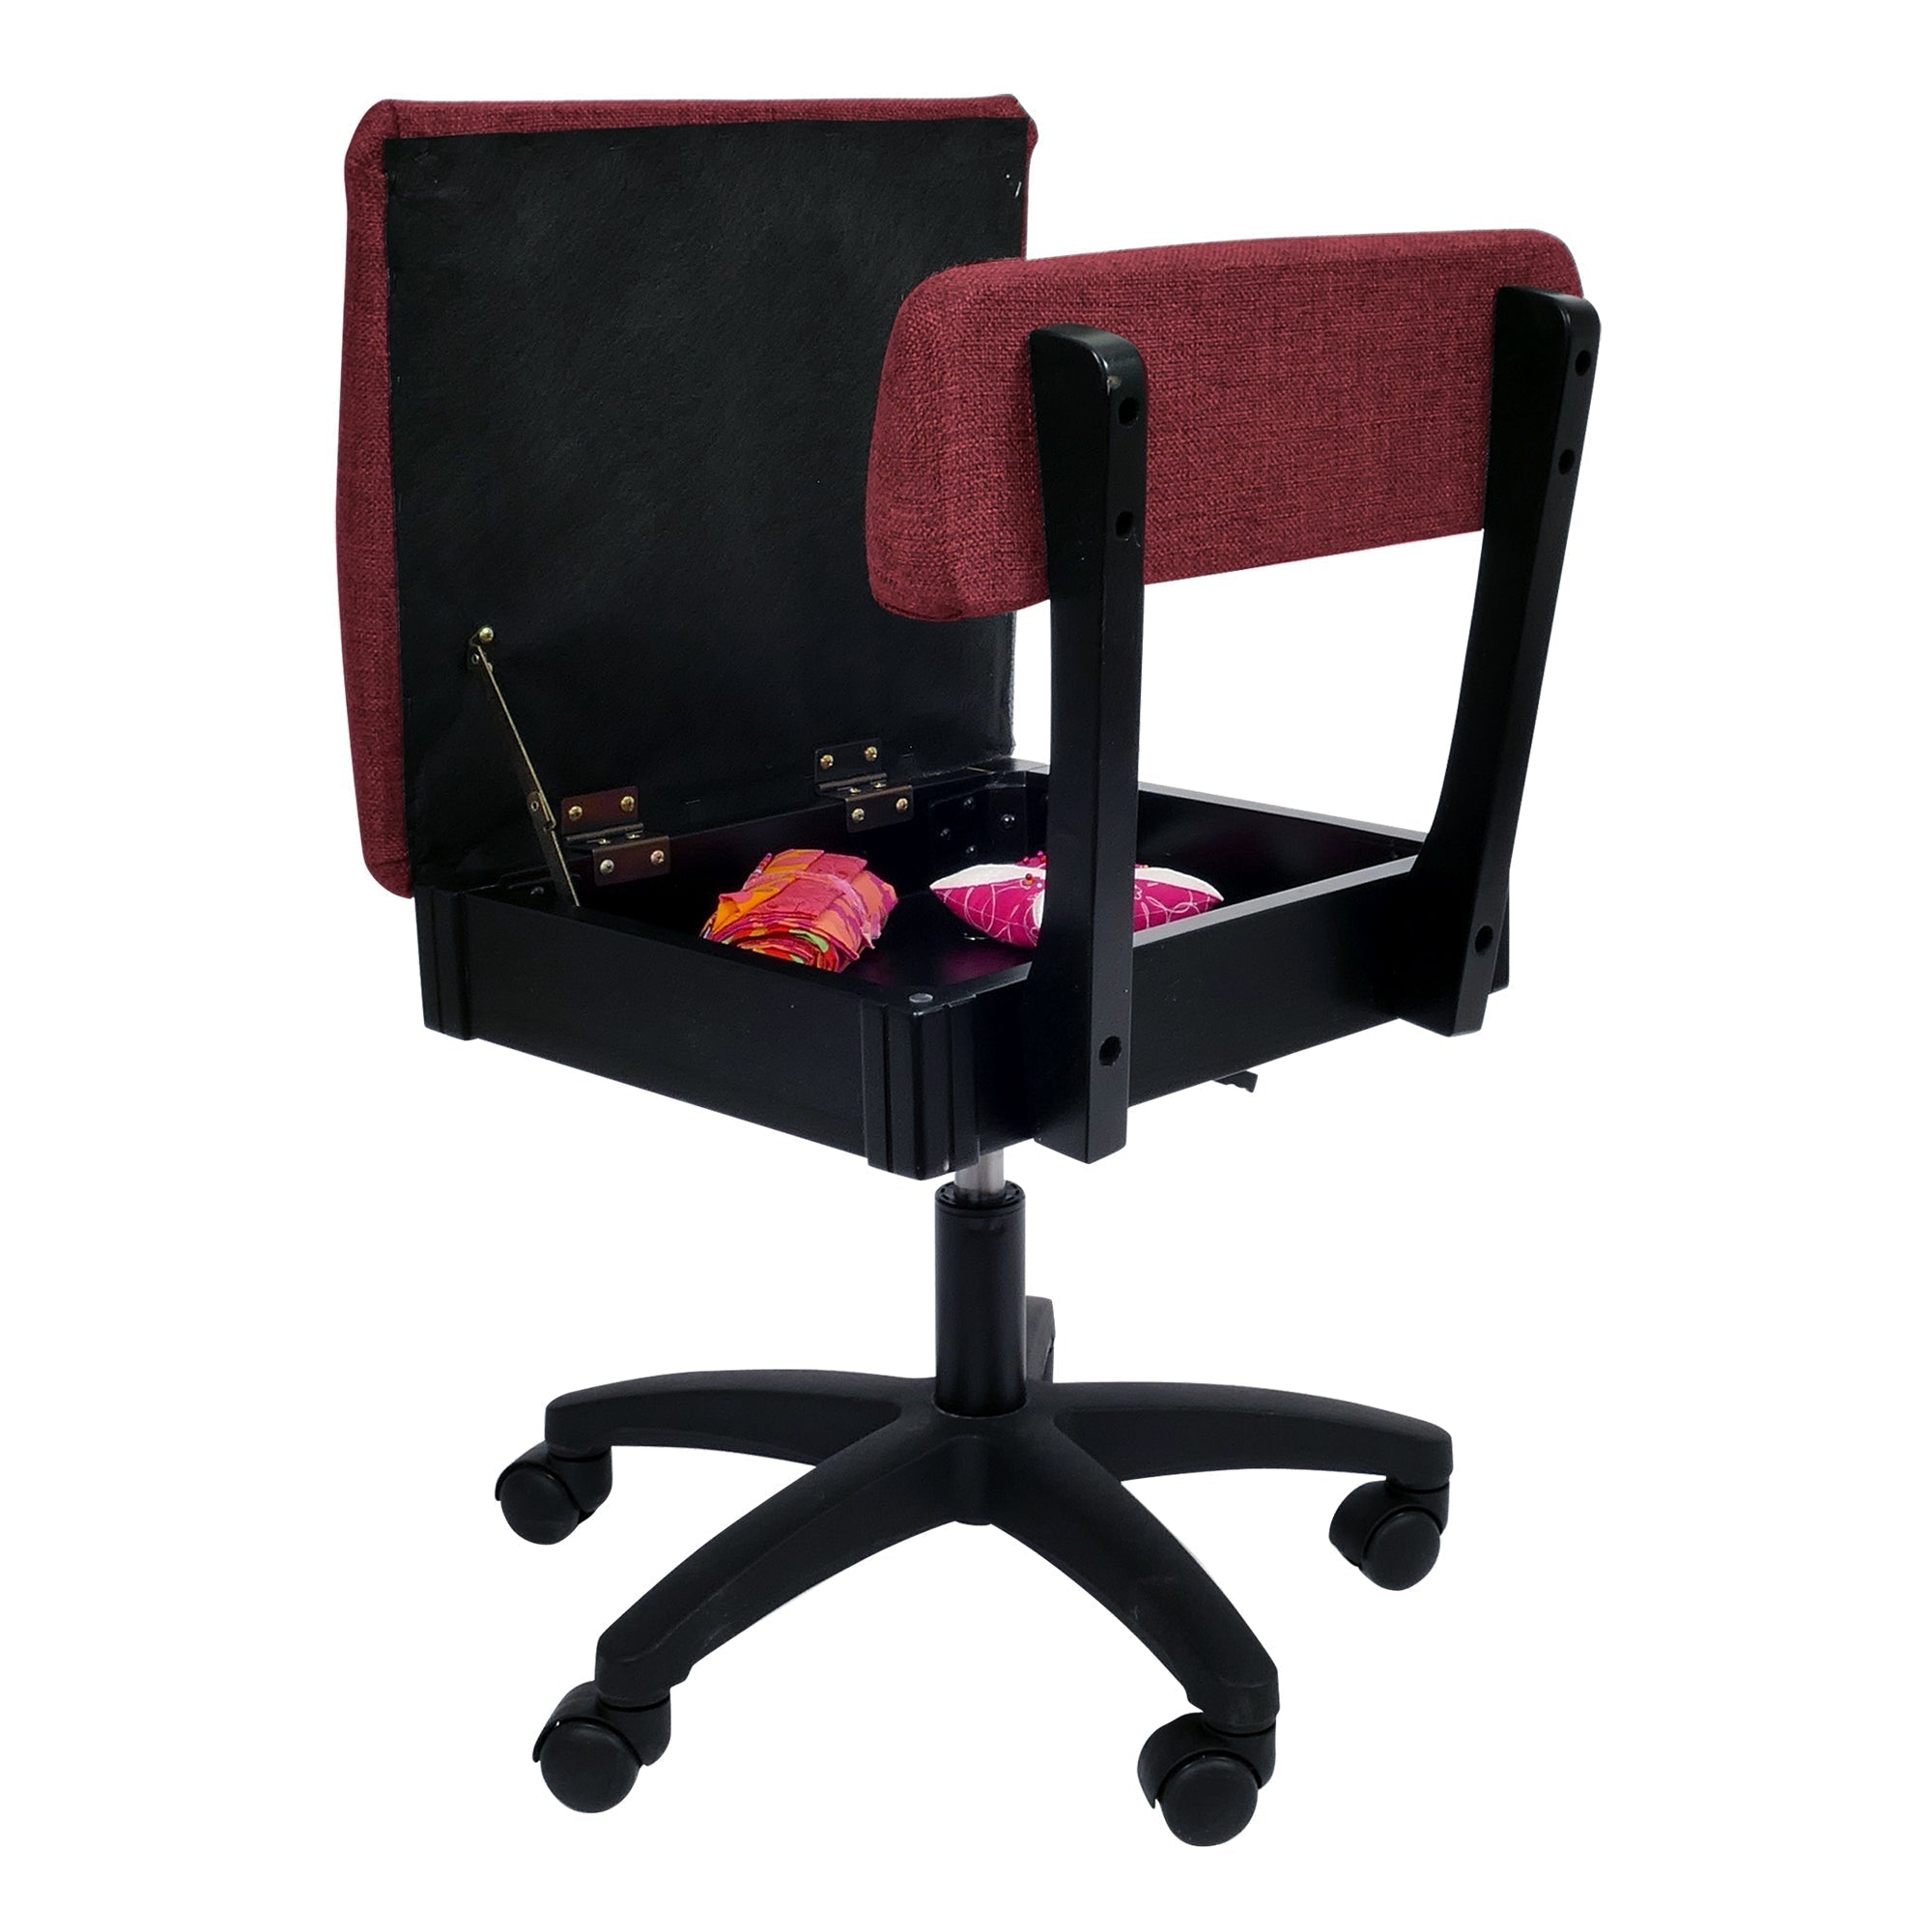 Arrow Height Adjustable Hydraulic Sewing Chair - Crown Ruby-Arrow Classic Sewing Furniture-My Favorite Quilt Store